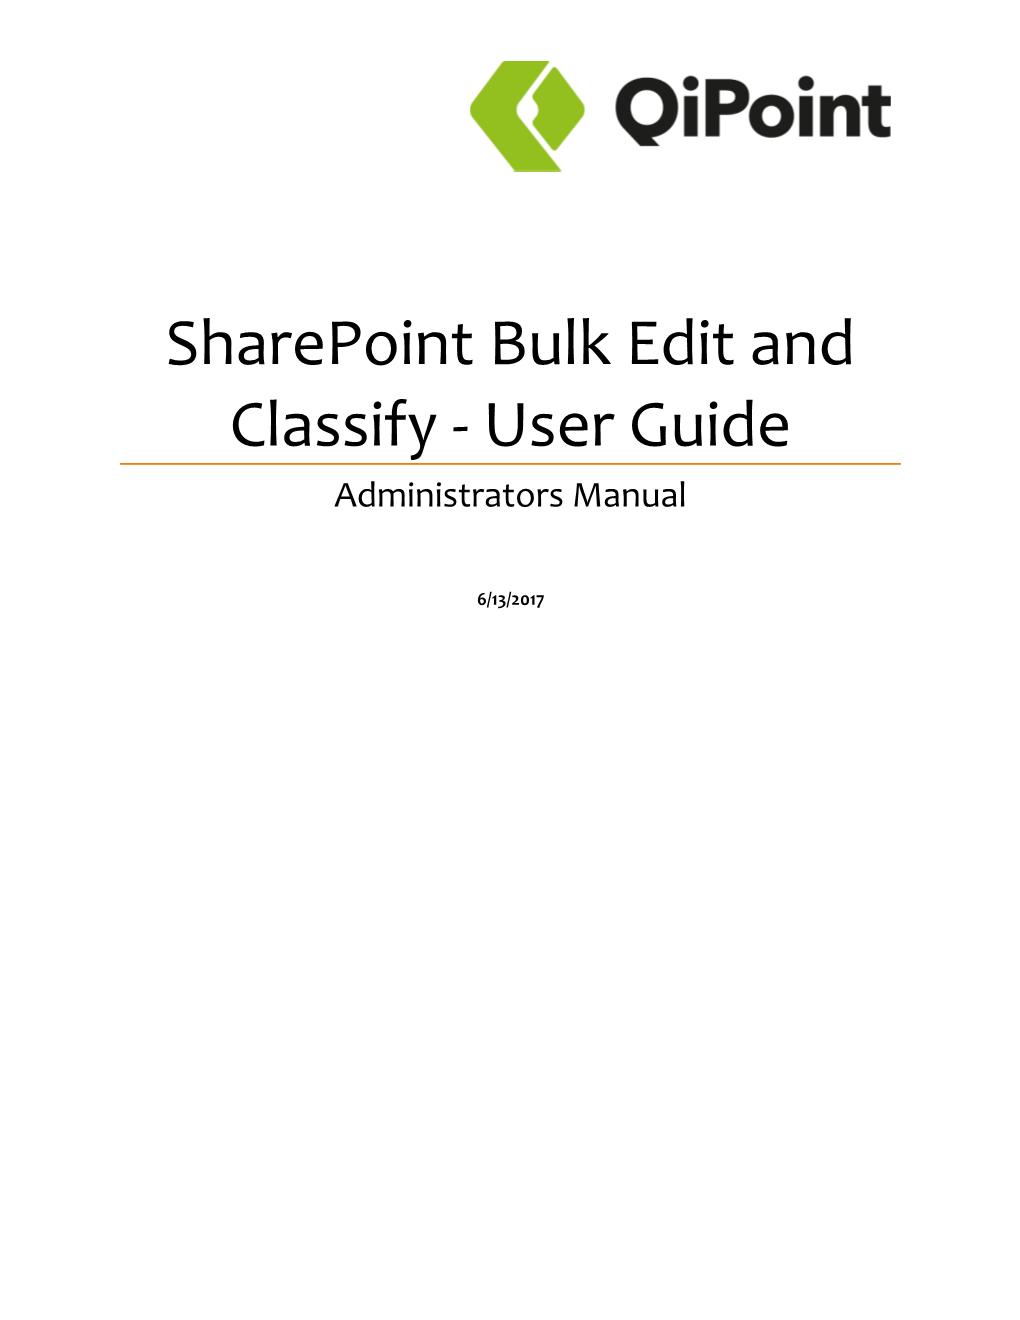 Sharepoint Bulk Edit and Classify - User Guide